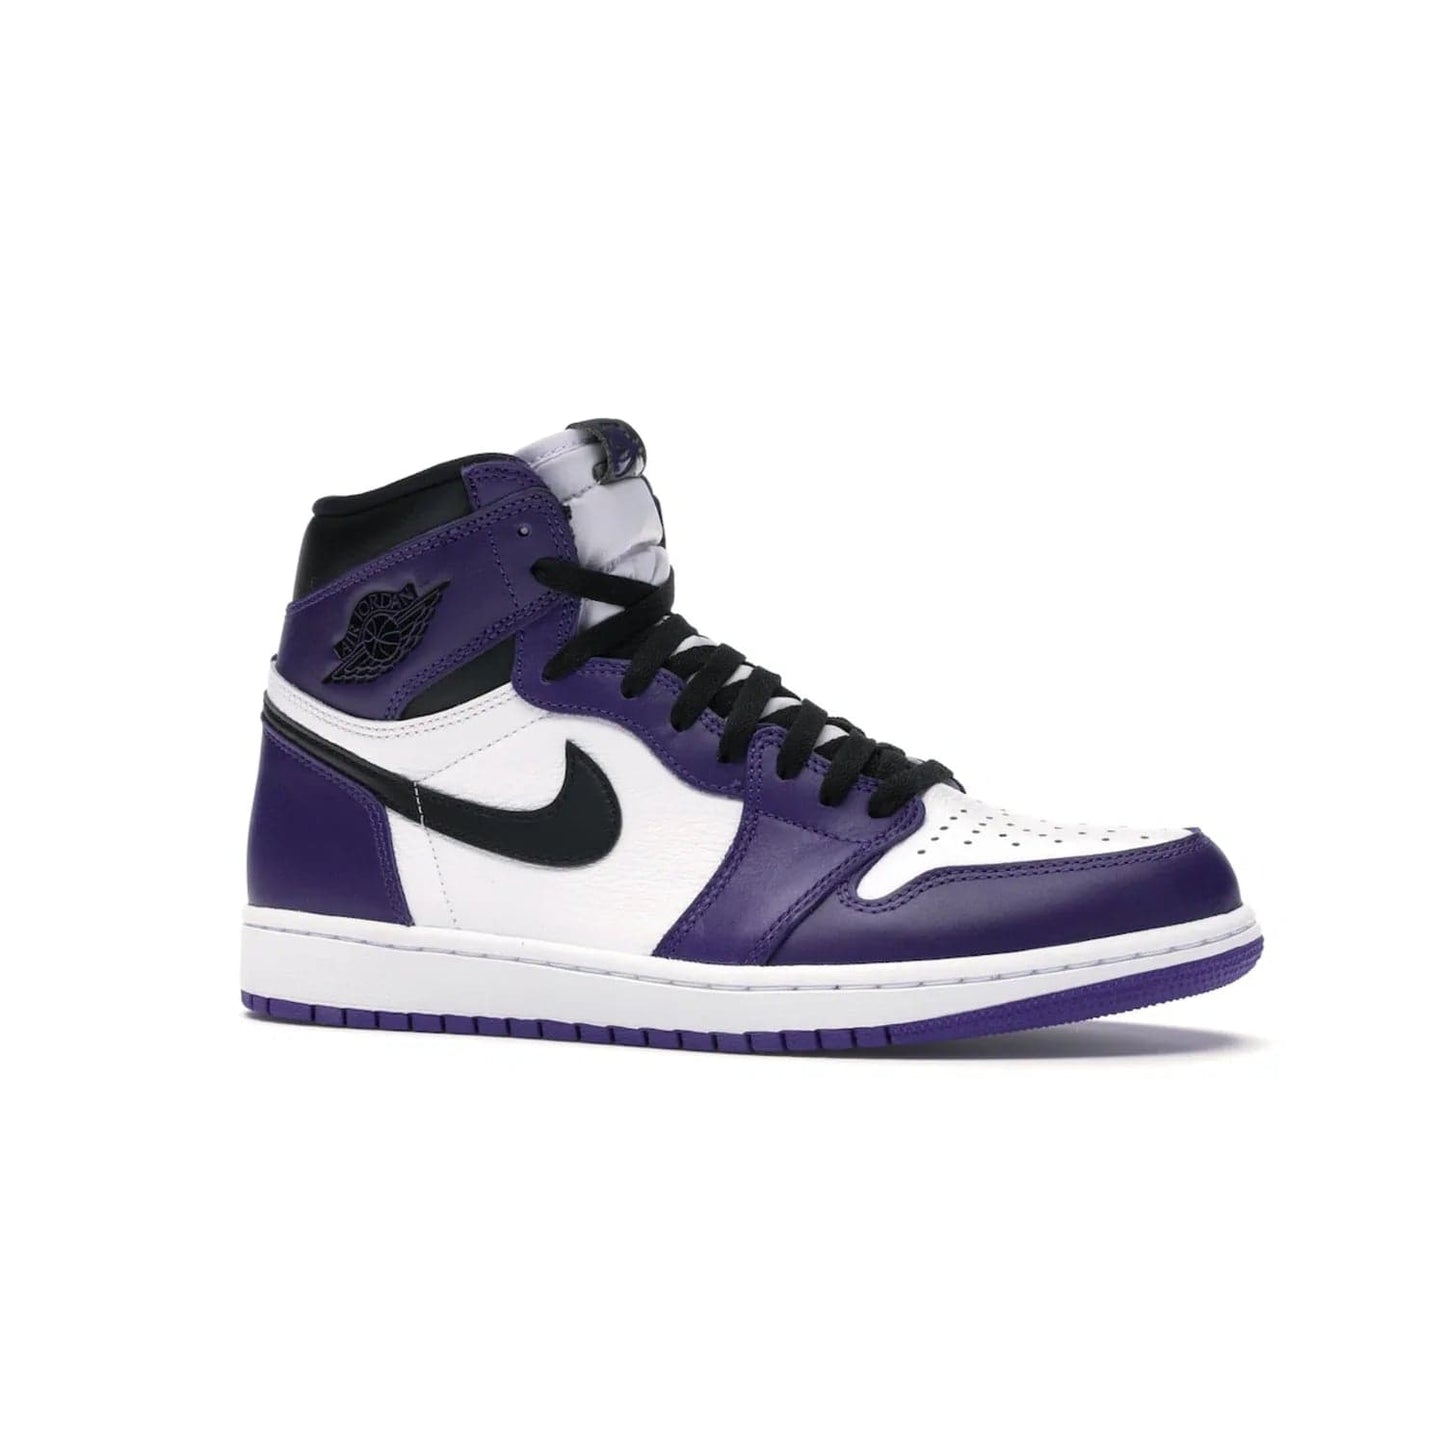 Jordan 1 Retro High Court Purple White - Image 3 - Only at www.BallersClubKickz.com - Grab the classic Jordan 1 Retro High Court Purple White and add major flavor to your collection. White leather upper with Court Purple overlays and Swoosh logo. White midsole and purple outsole. Get yours and rep your Jordan Brand.